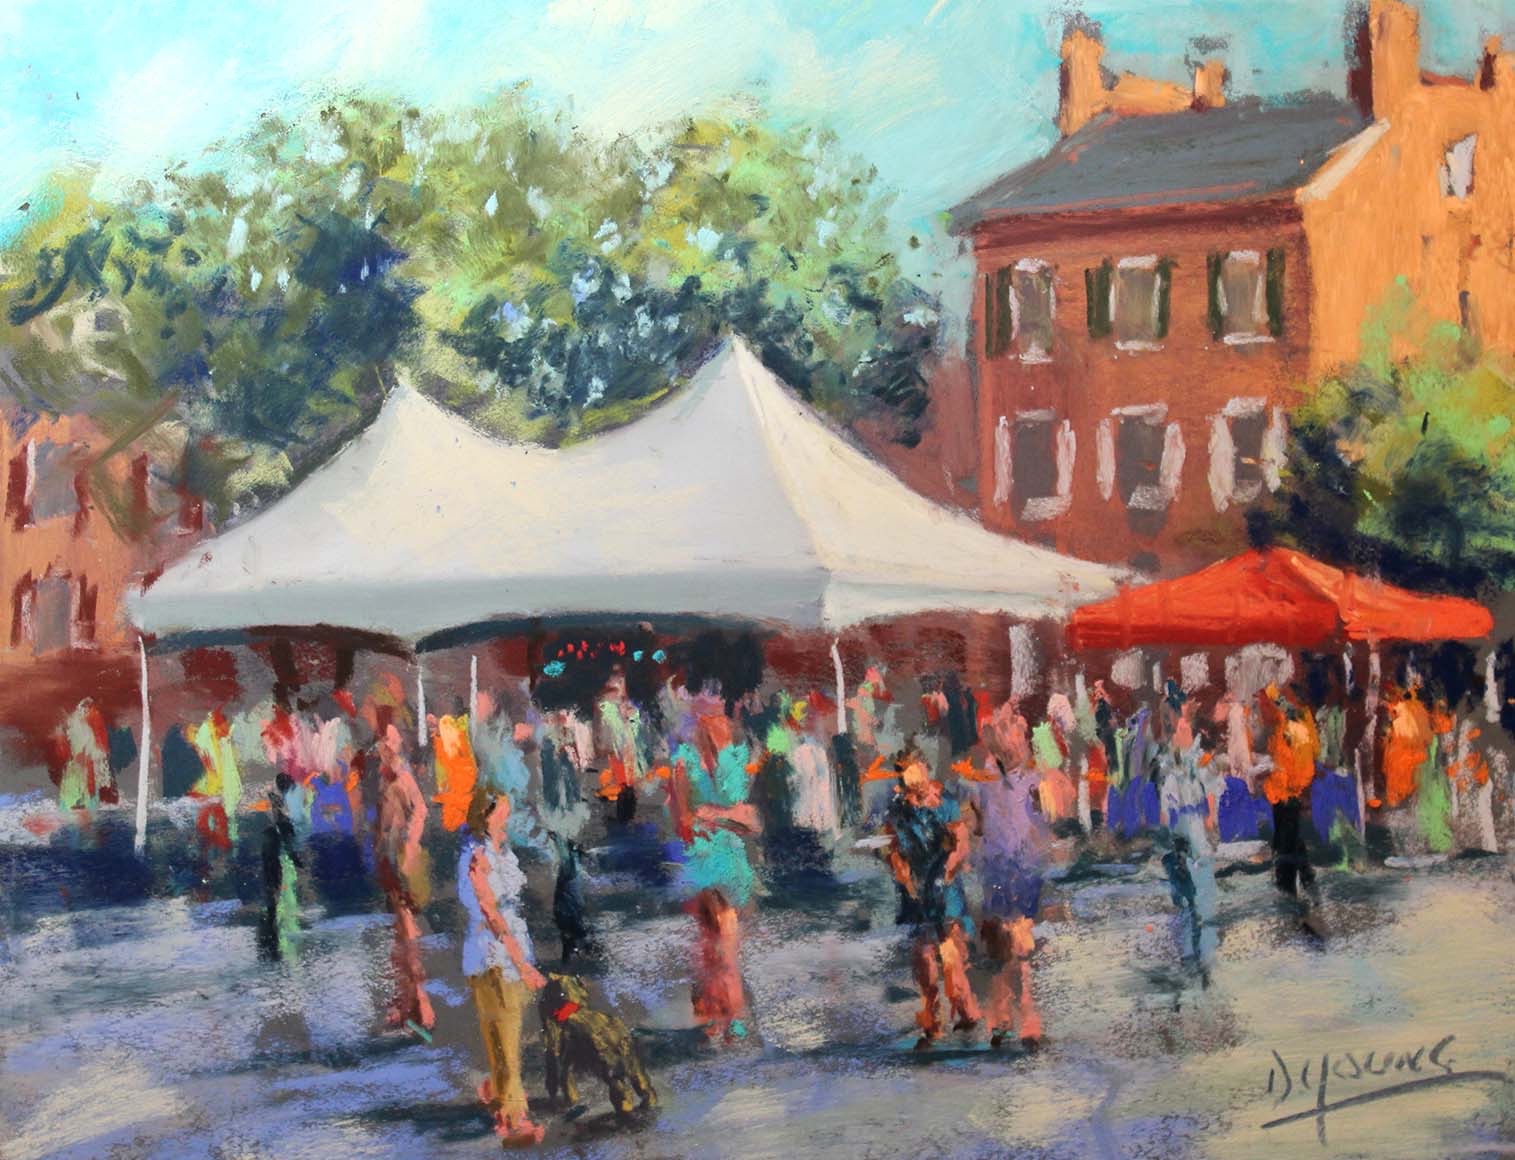 “Street Fair” by Dennis Young, 2019, oil, 11 x 14 in., Available from Mo’zArt Gallery, New Castle, DE, Plein air